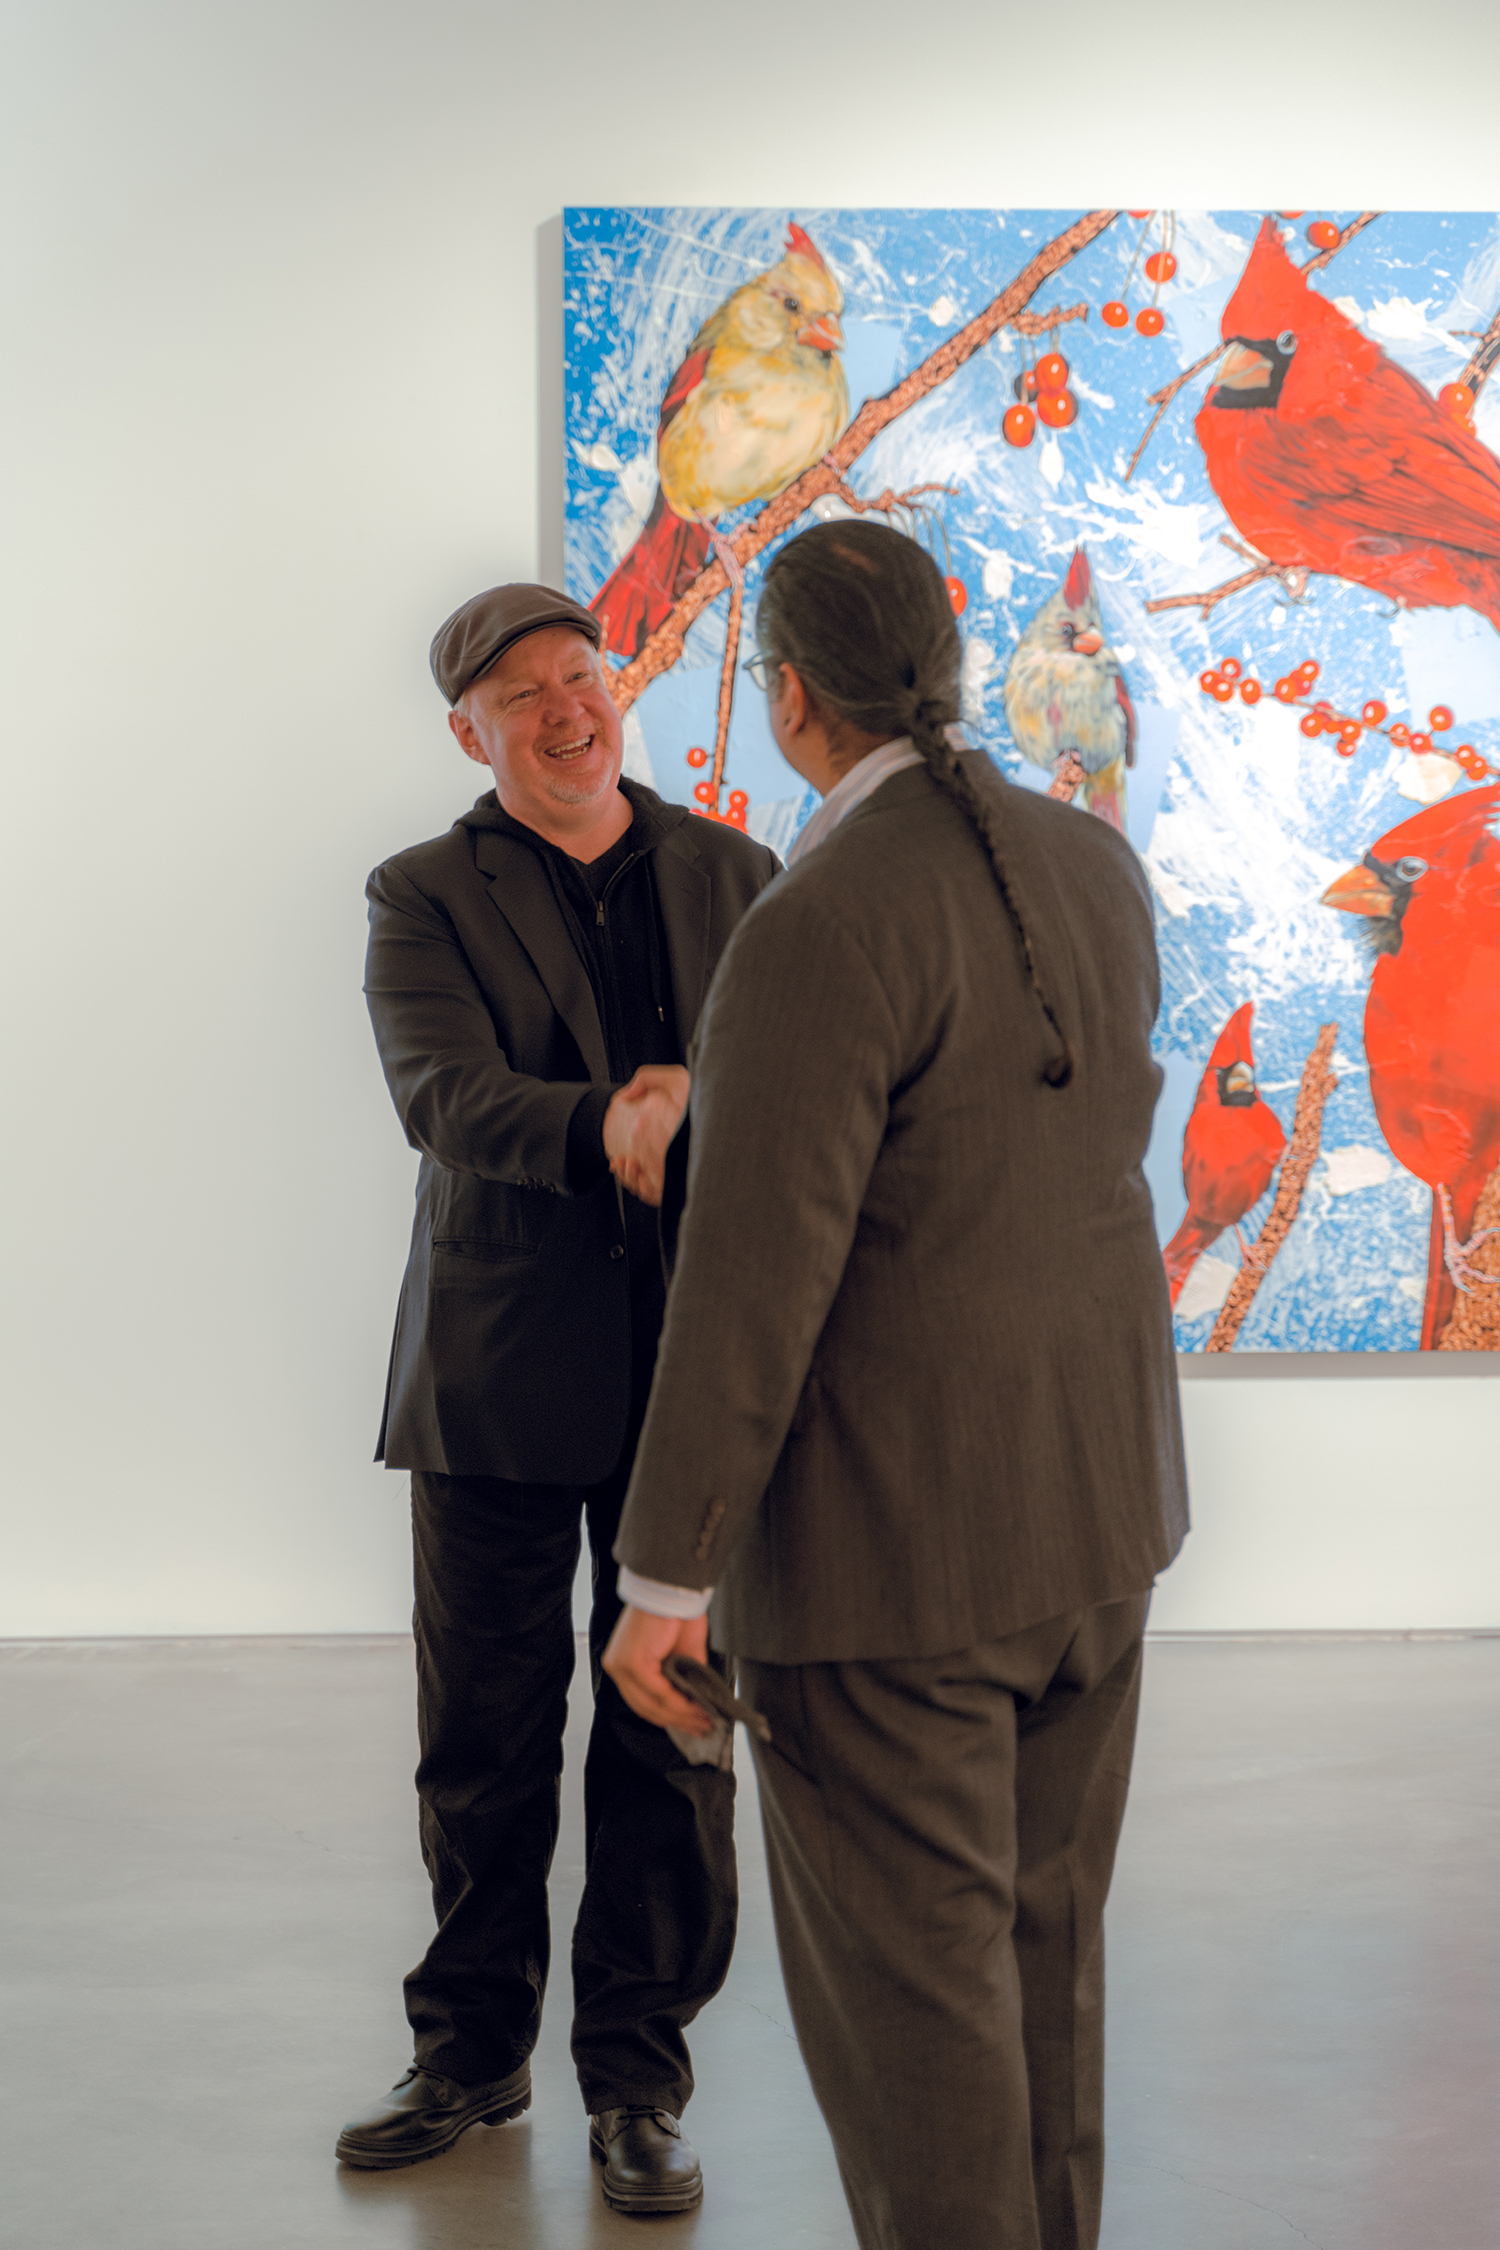 Two men are shaking hands, one facing us with a big smile and a black beret and jacket. The other is facing away from the camera, in a tweed suit and braided hair. In the background is a large painting of red cardinals on a blue background.